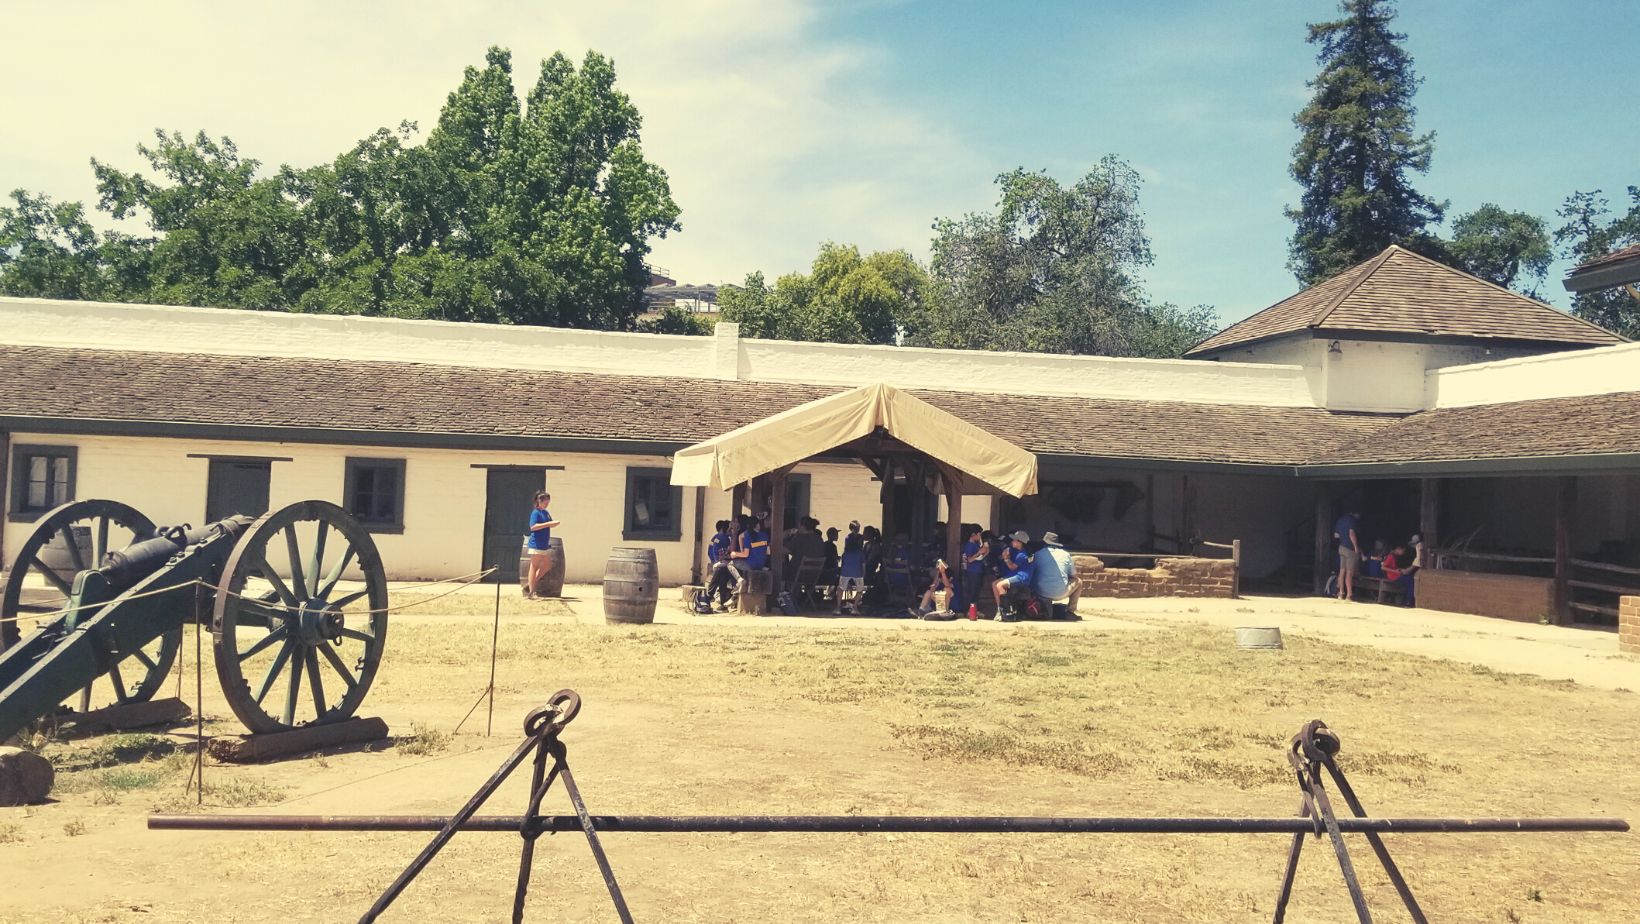 students gather under a wooden ramada inside Sutter's Fort. a green cannon on the left-hand side and firepit in the foreground